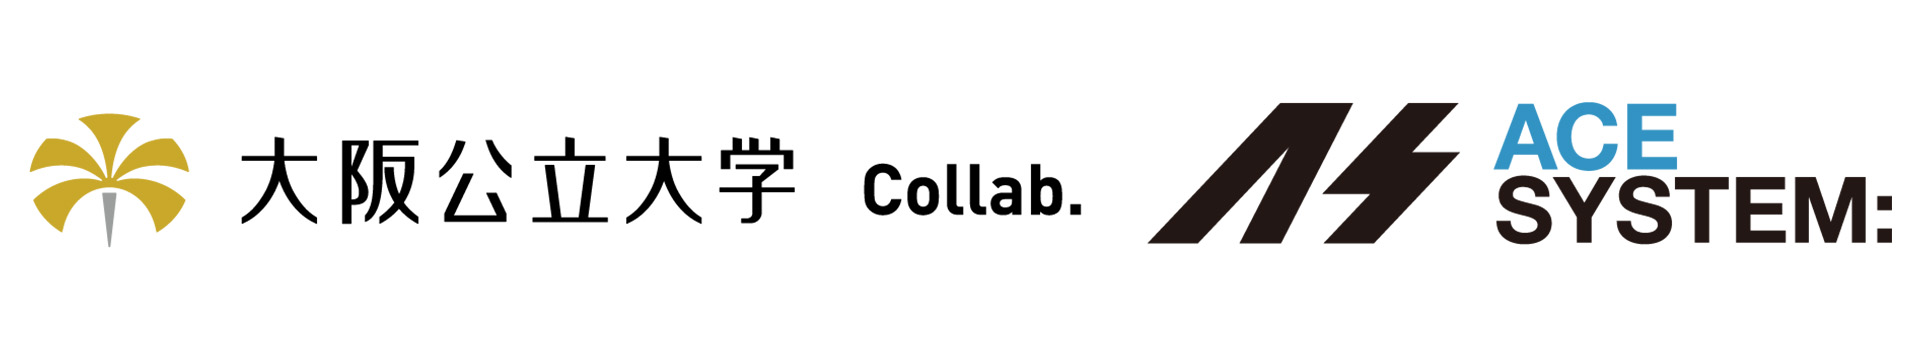 Academic-industrial collaboration